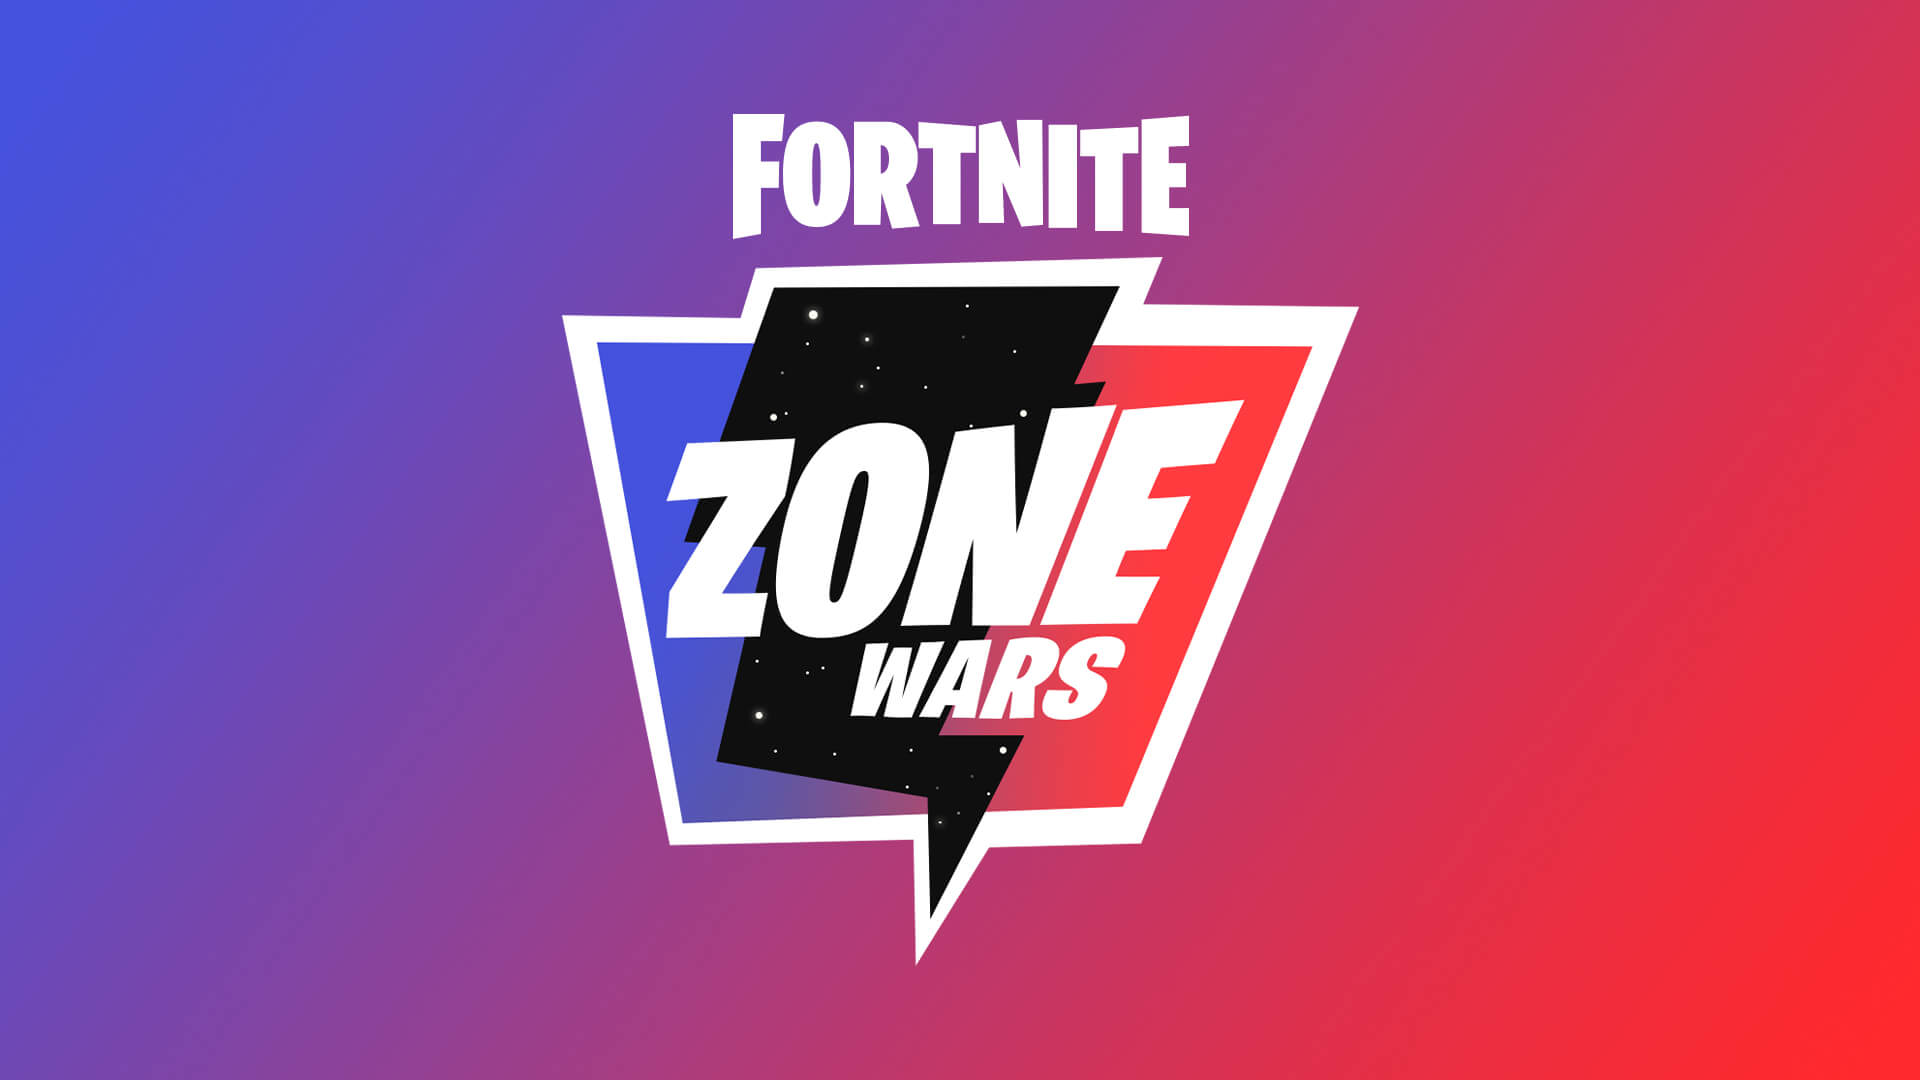 Image for Fortnite v10.40 adds The Combine, Zone Wars LTM and makes improvements to matchmaking, aim assist and sensitivity